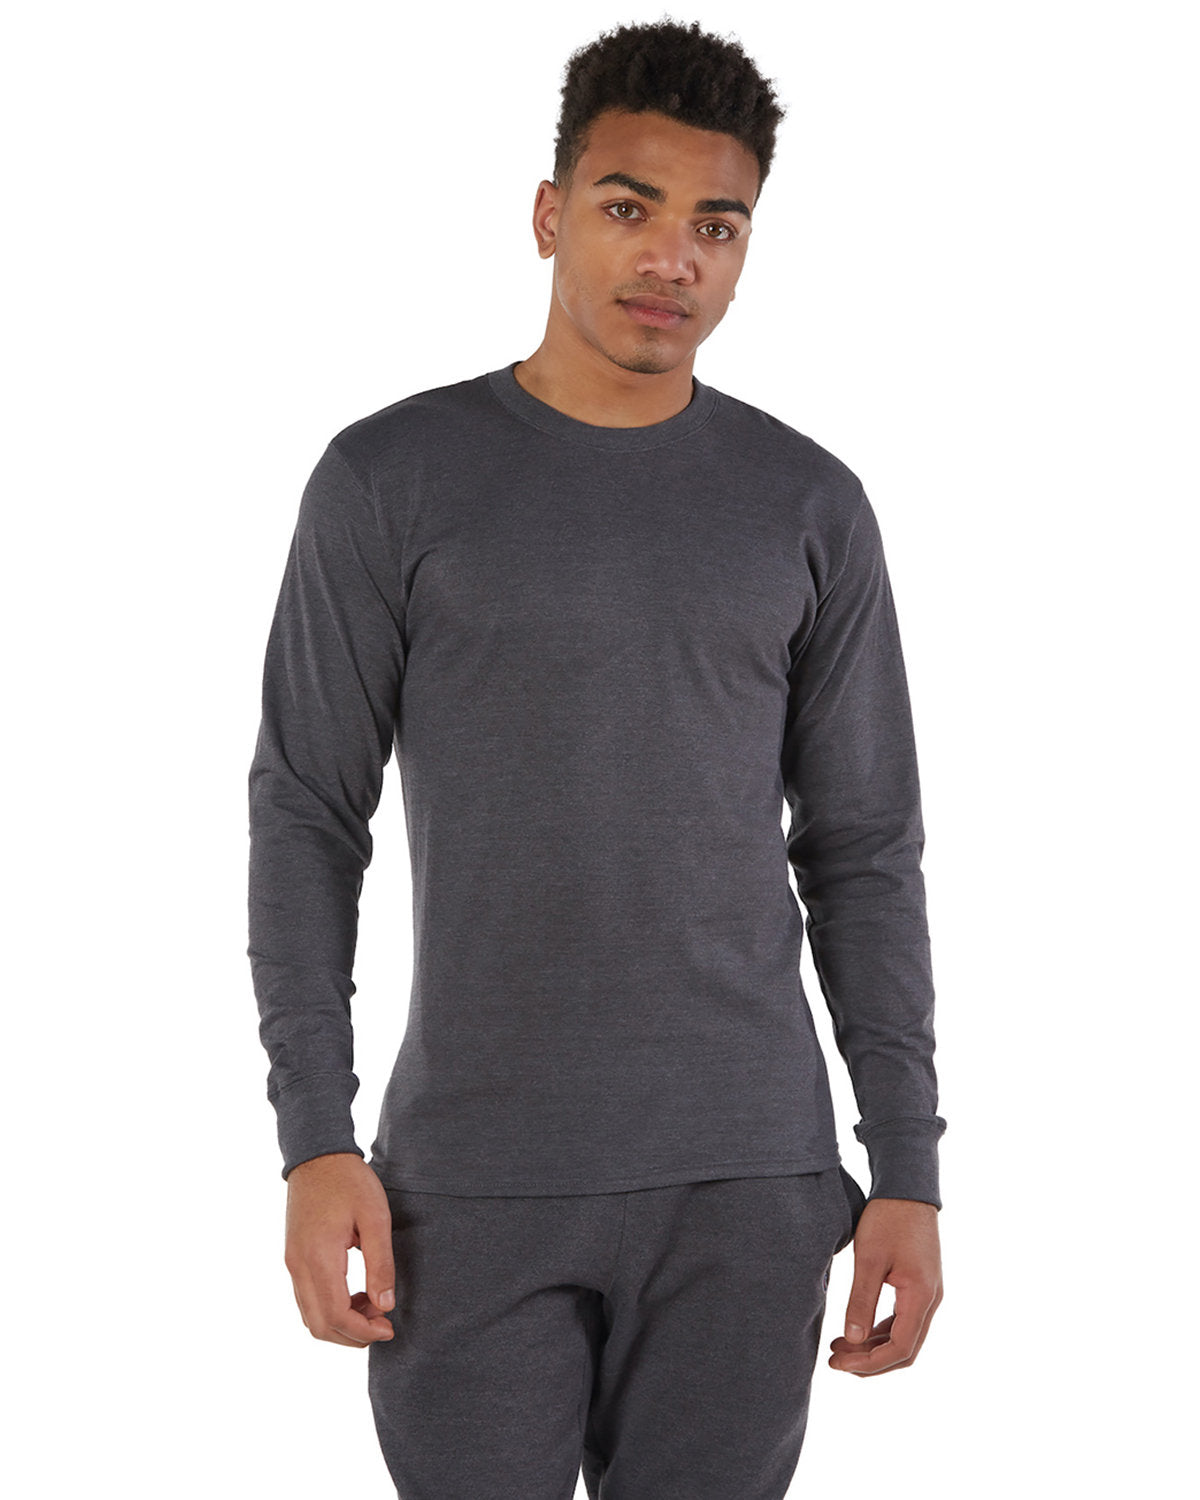 CP15-Champion-CHARCOAL HEATHER